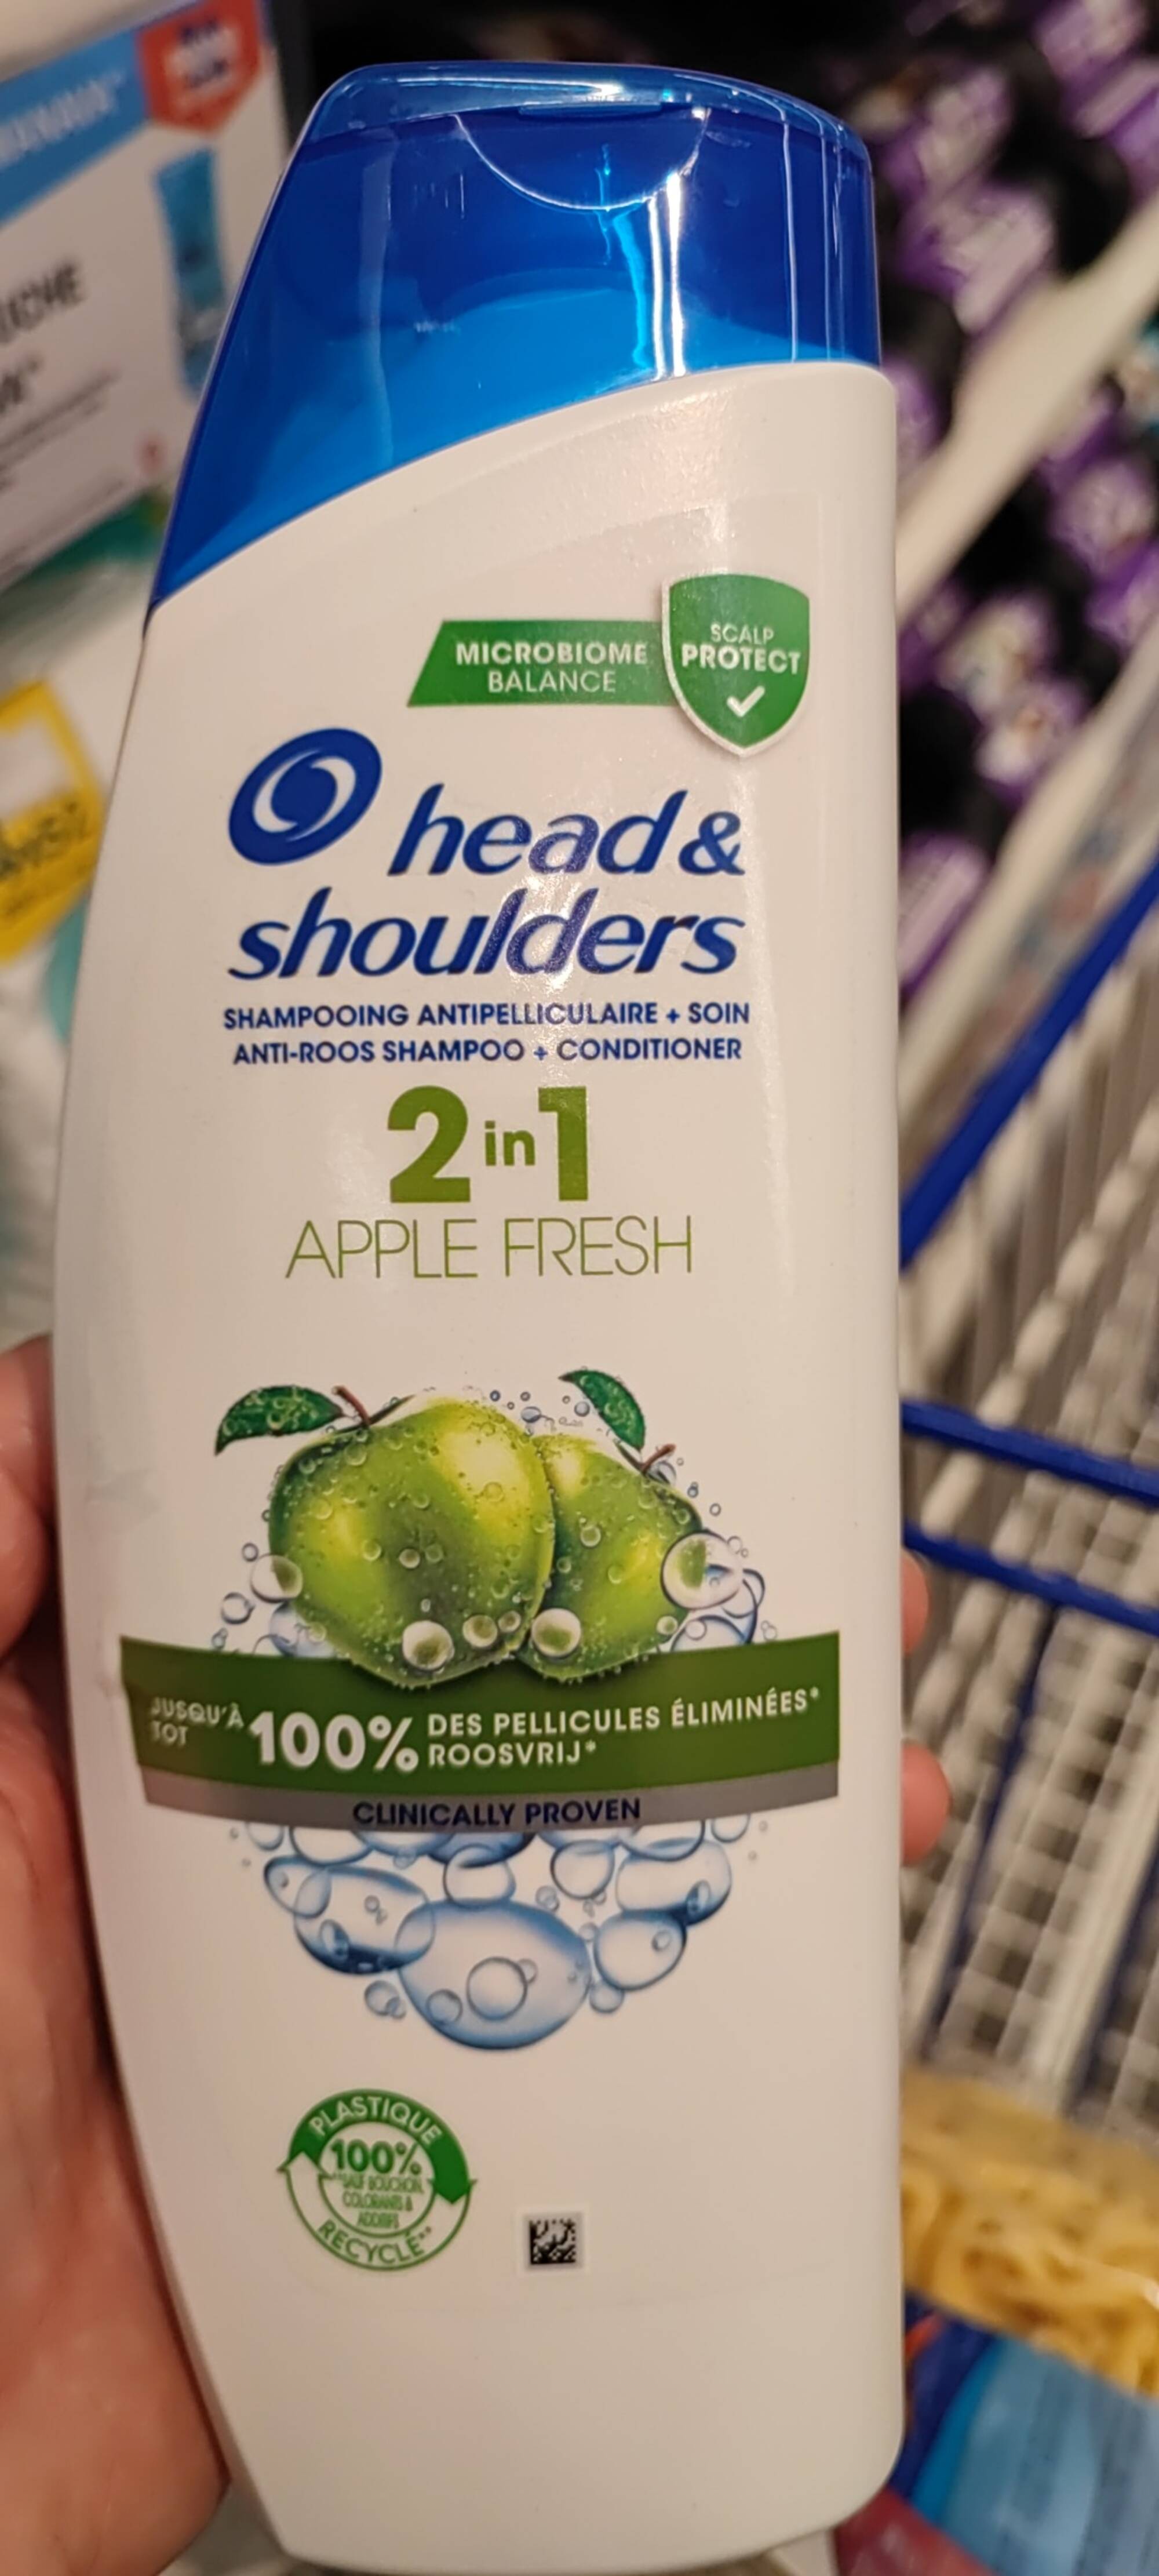 HEAD & SHOULDERS - Apple fresh - Shampooing antipelliculaire 2 in 1